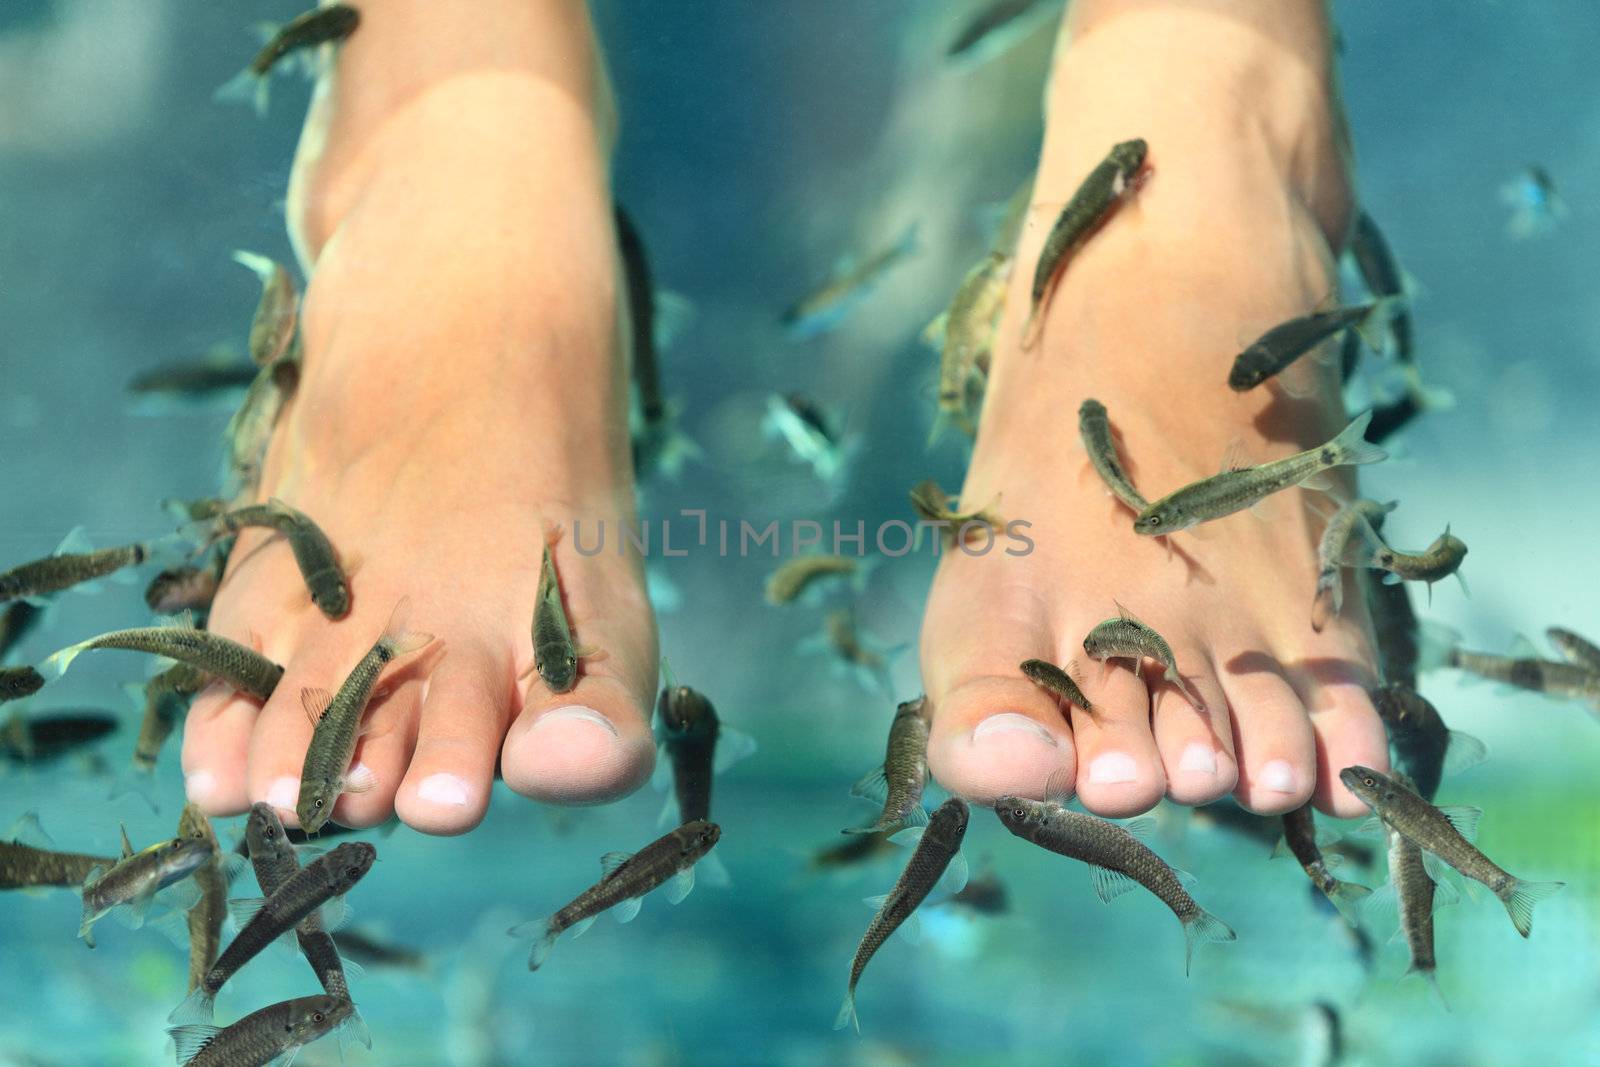 Fish spa pedicure wellness skin care treatment with the fish rufa garra, also called doctor fish, nibble fish and kangal fish.